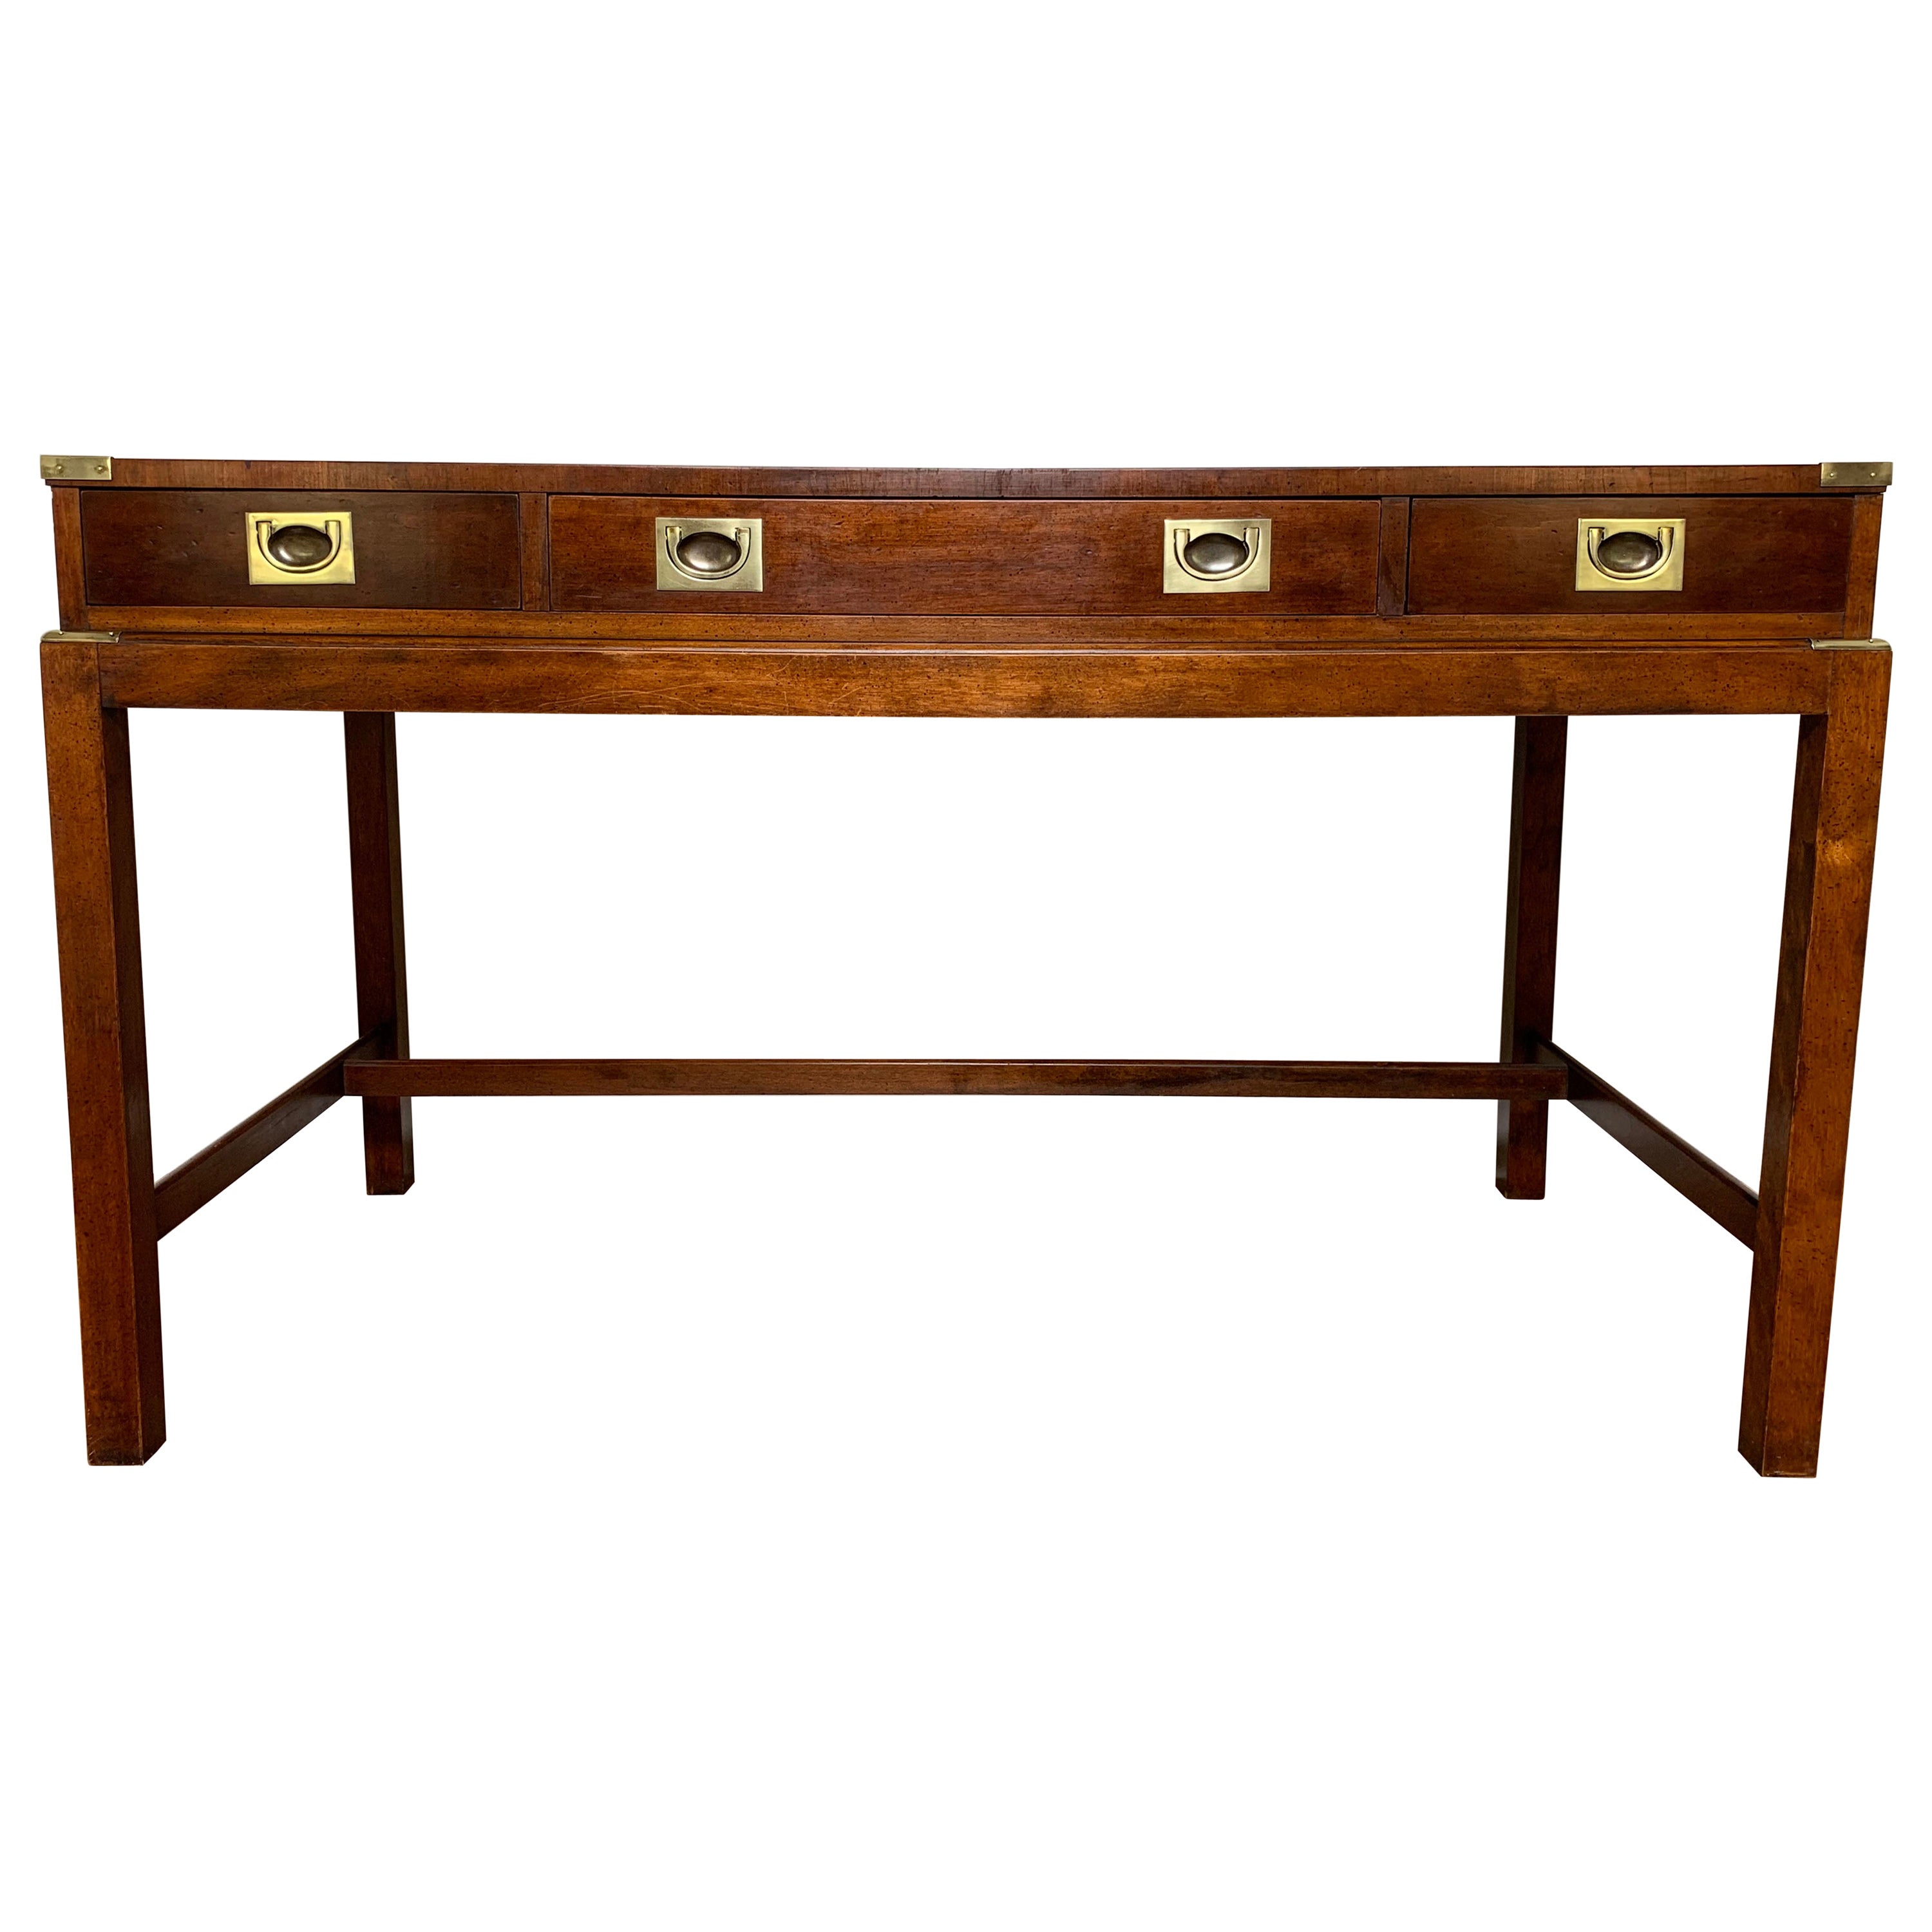 Campaign Style Mahogany Writing Desk with Brass Hardware, Circa 1970s